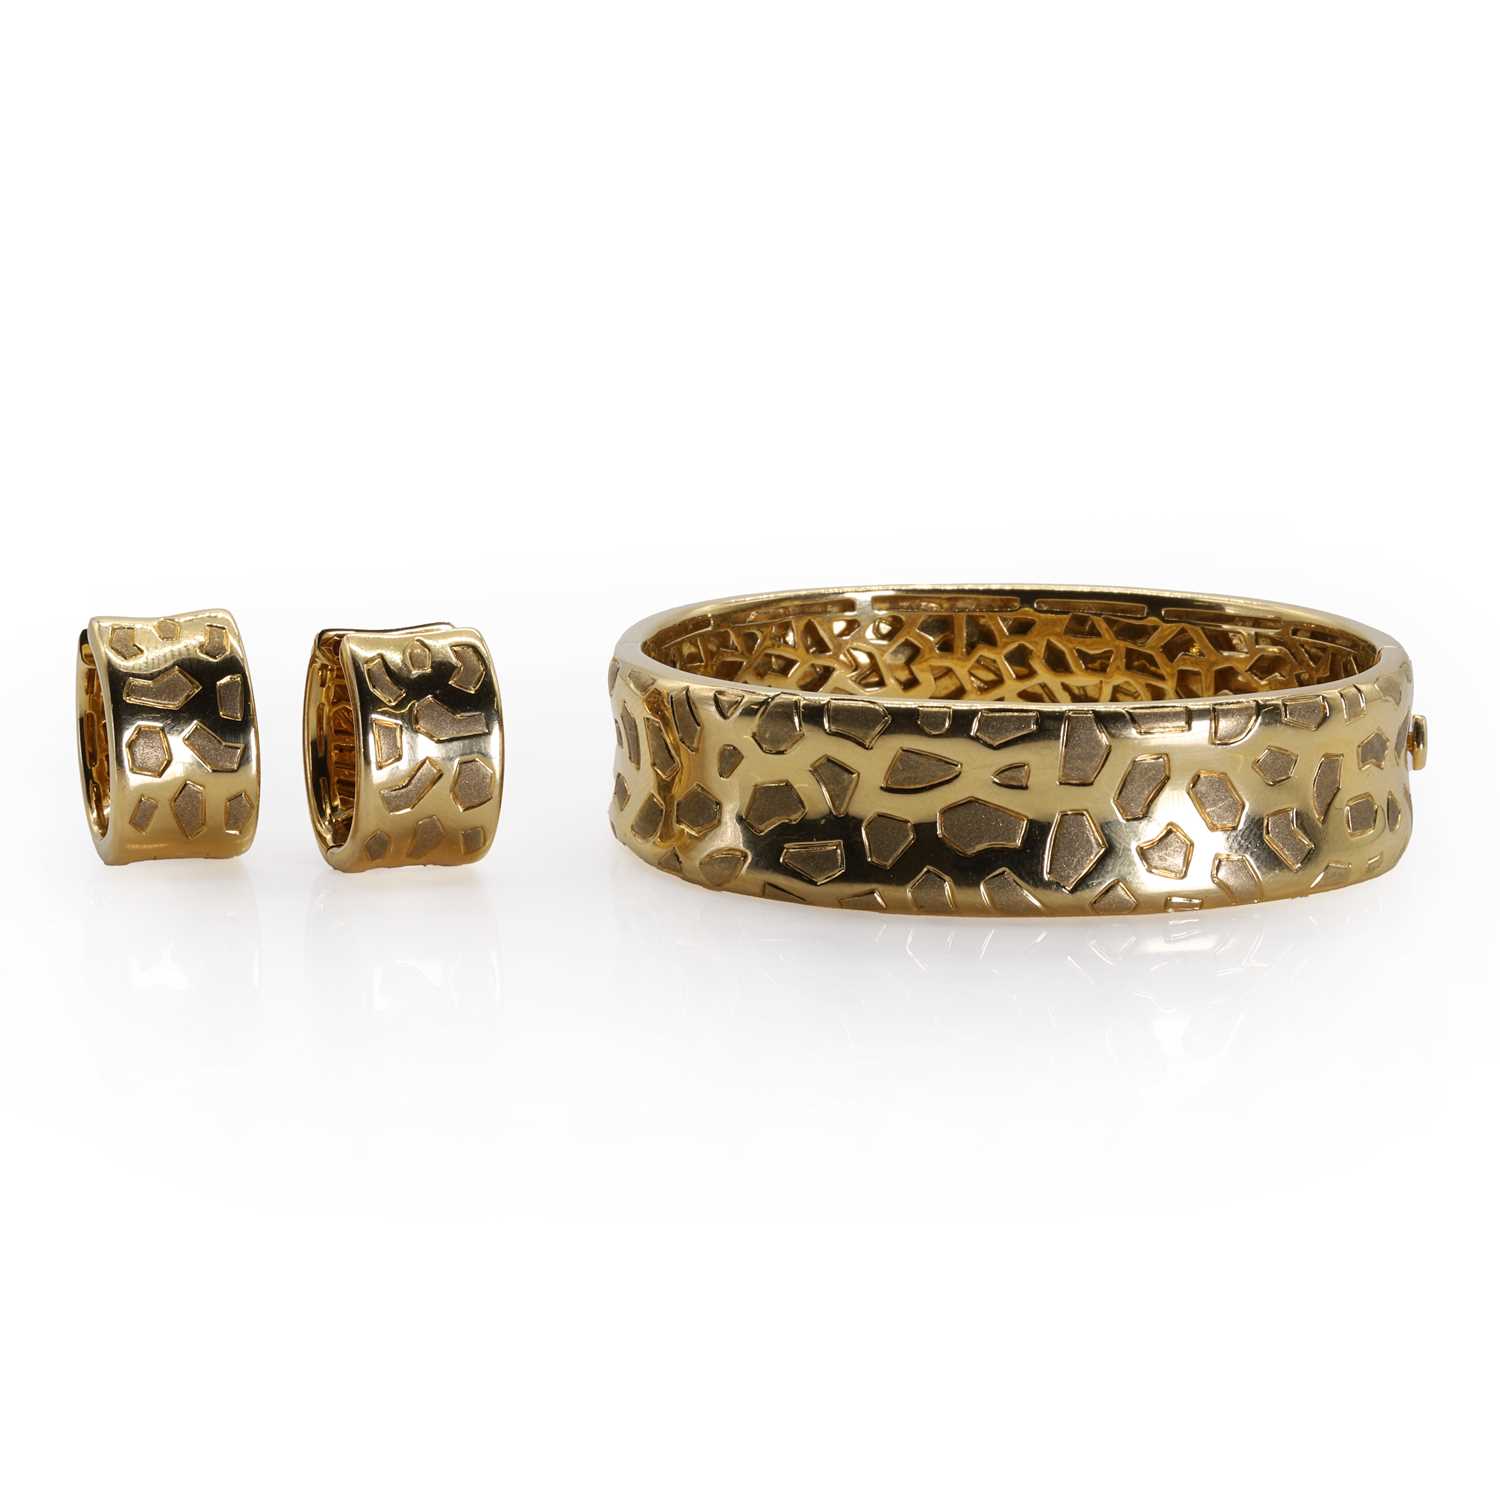 An 18ct gold 'Giraffe' bangle and earring set, by Roberto Coin, - Image 3 of 5